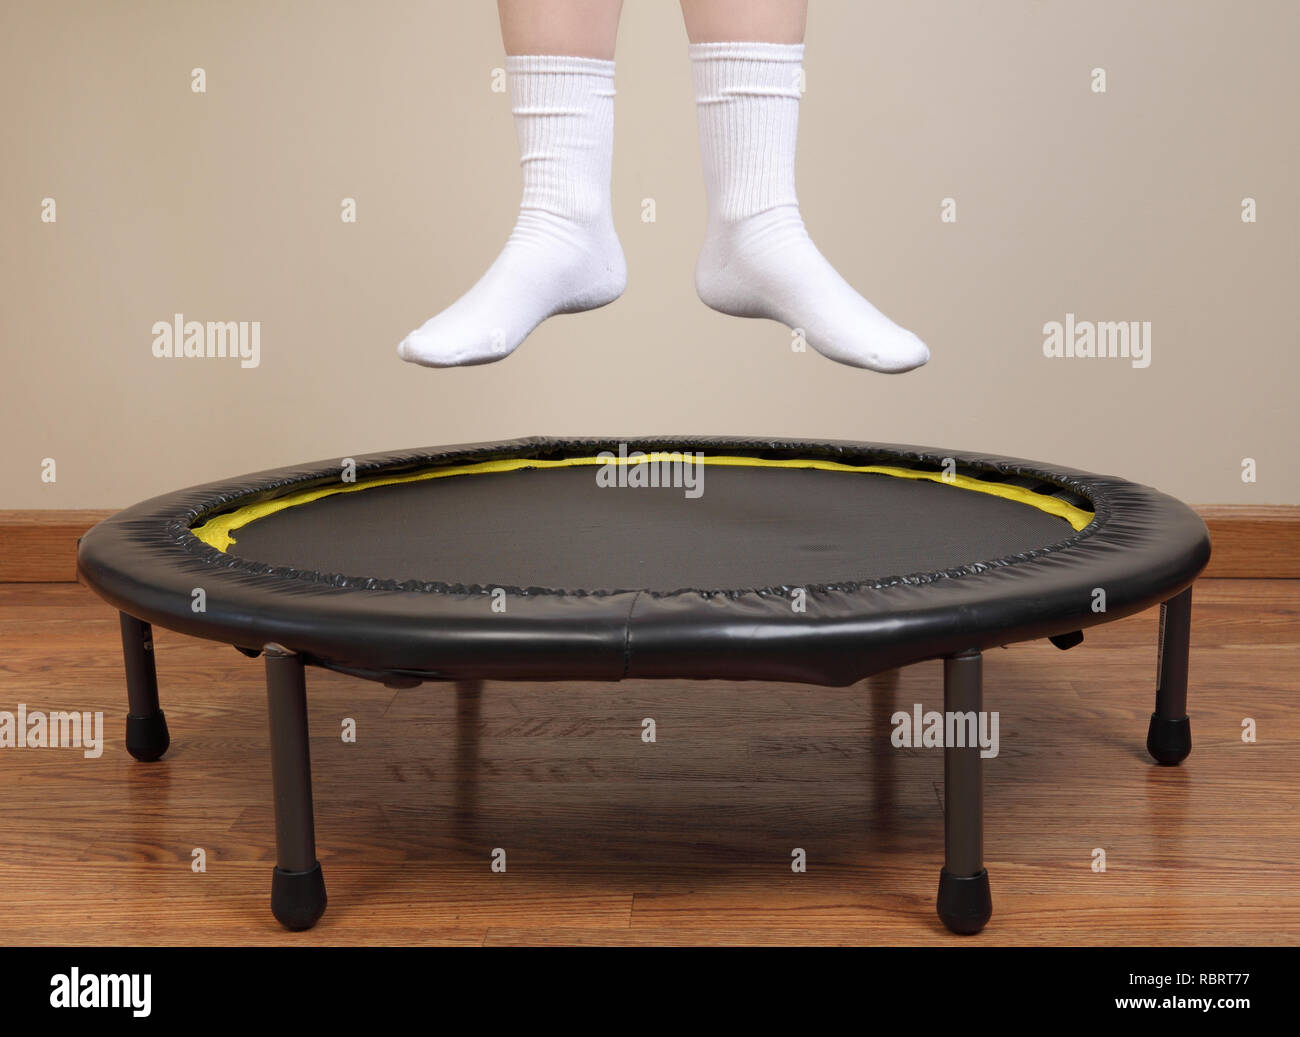 woman jumping on small trampoline showing feet and lower legs only Stock Photo